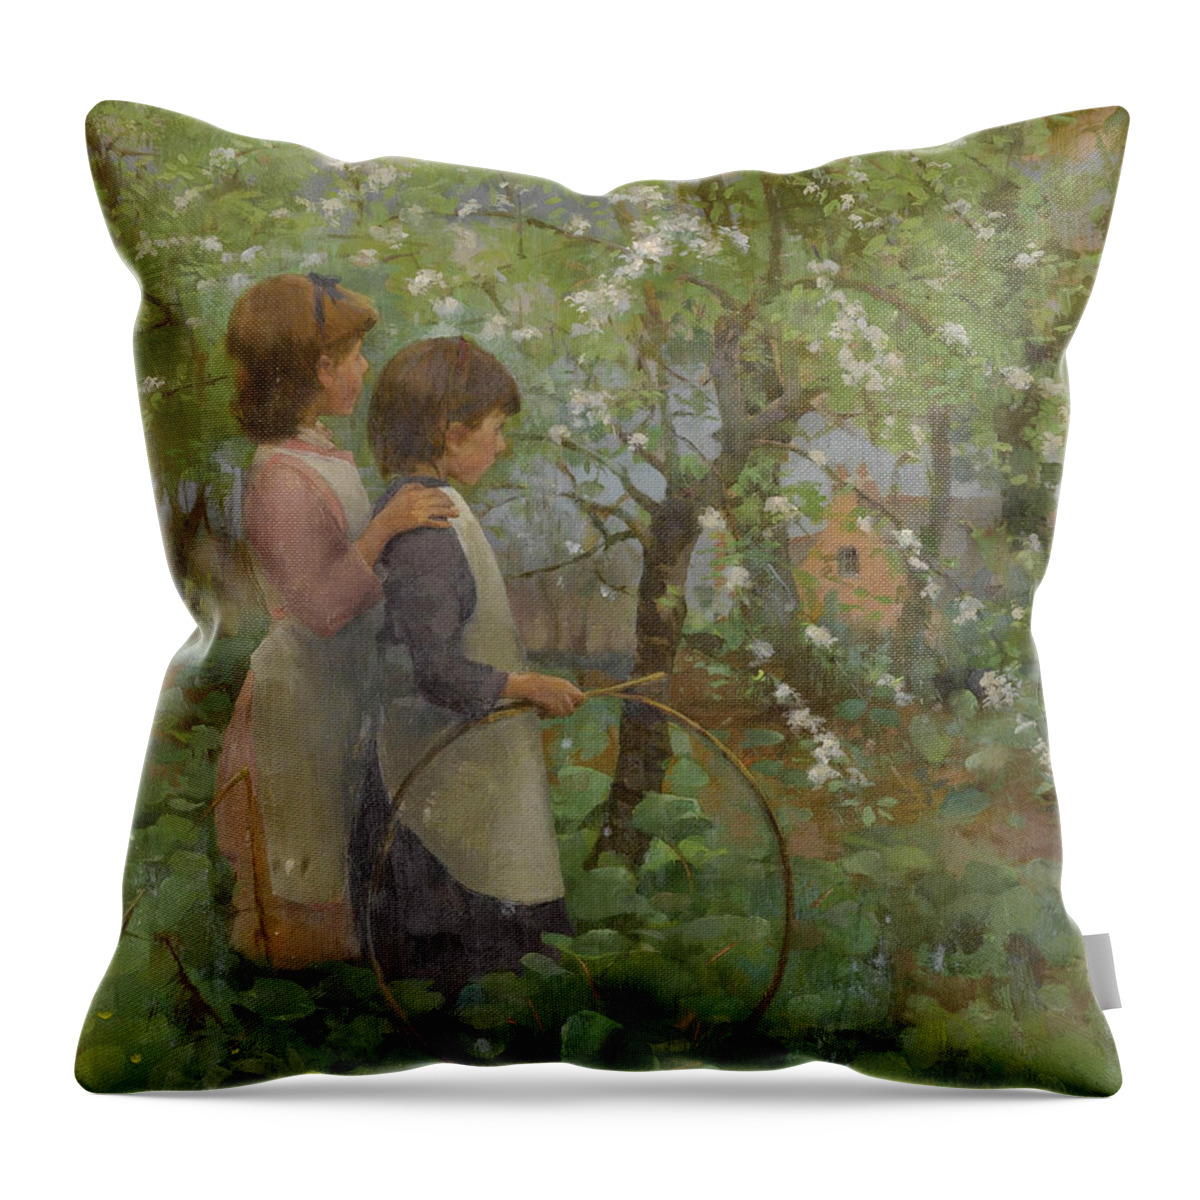 19th Century Art Throw Pillow featuring the painting The Orchard by Elizabeth Forbes